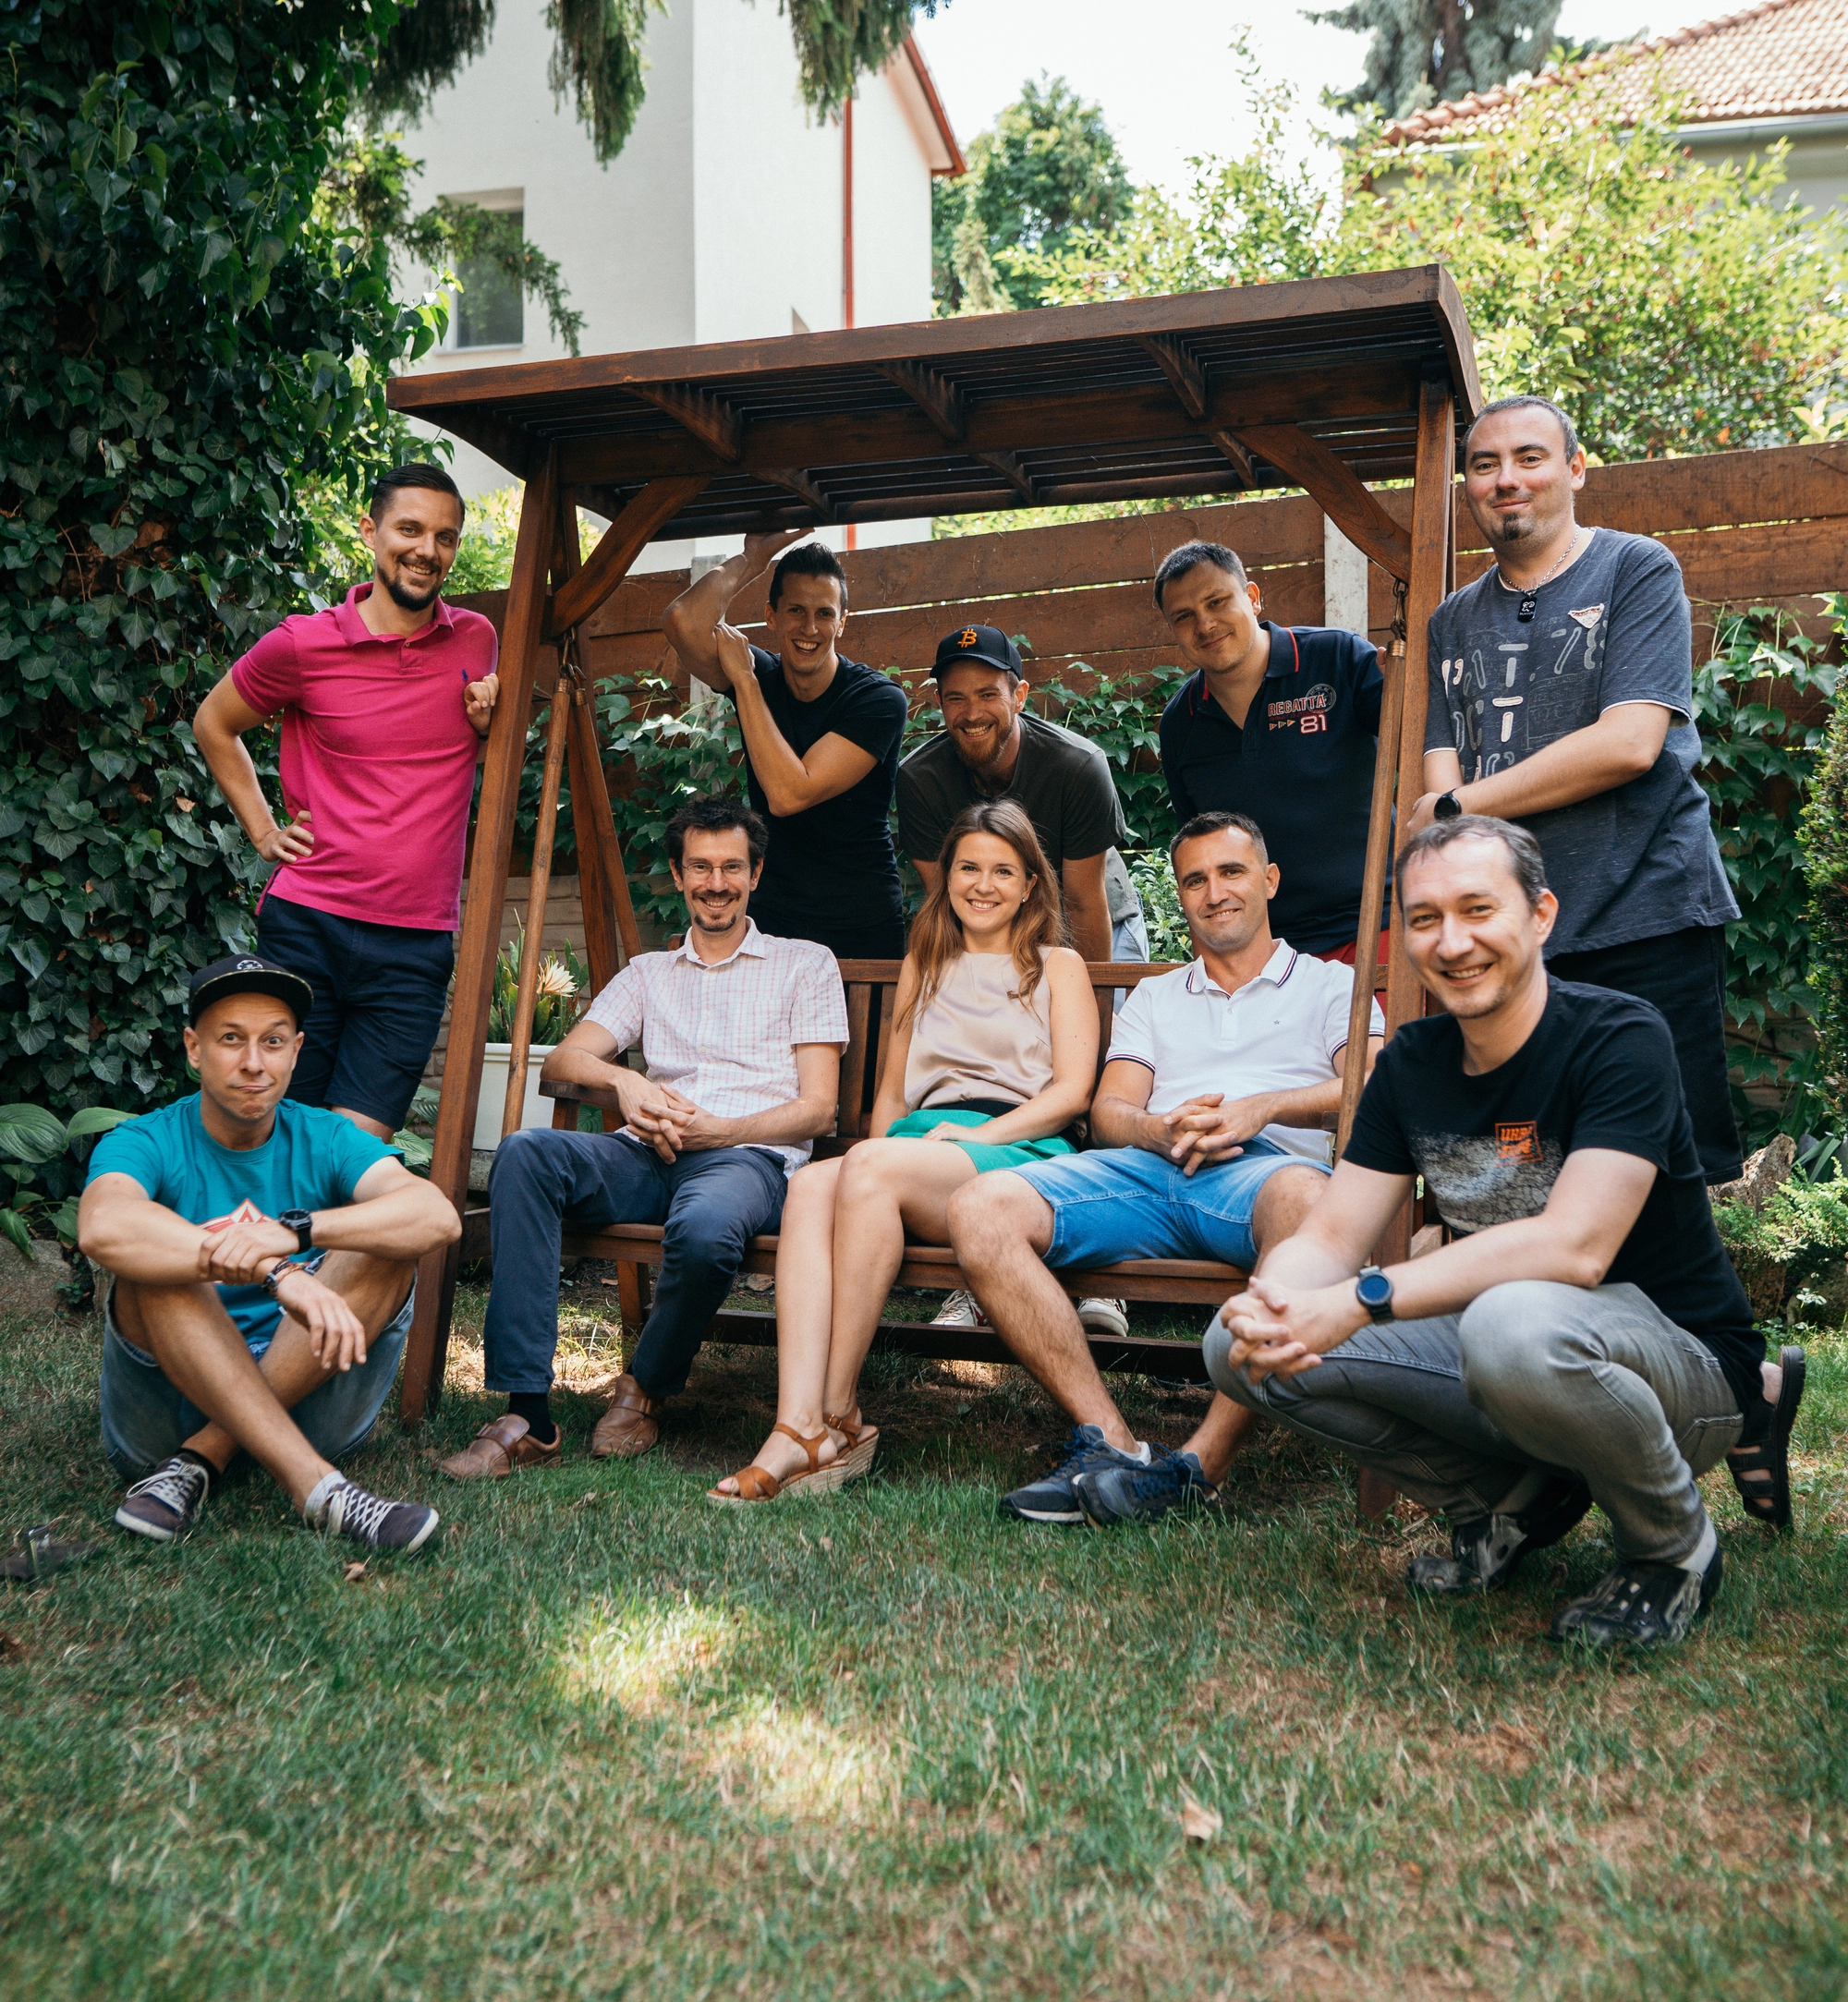 The FatChilli team hanging out in a backyard.